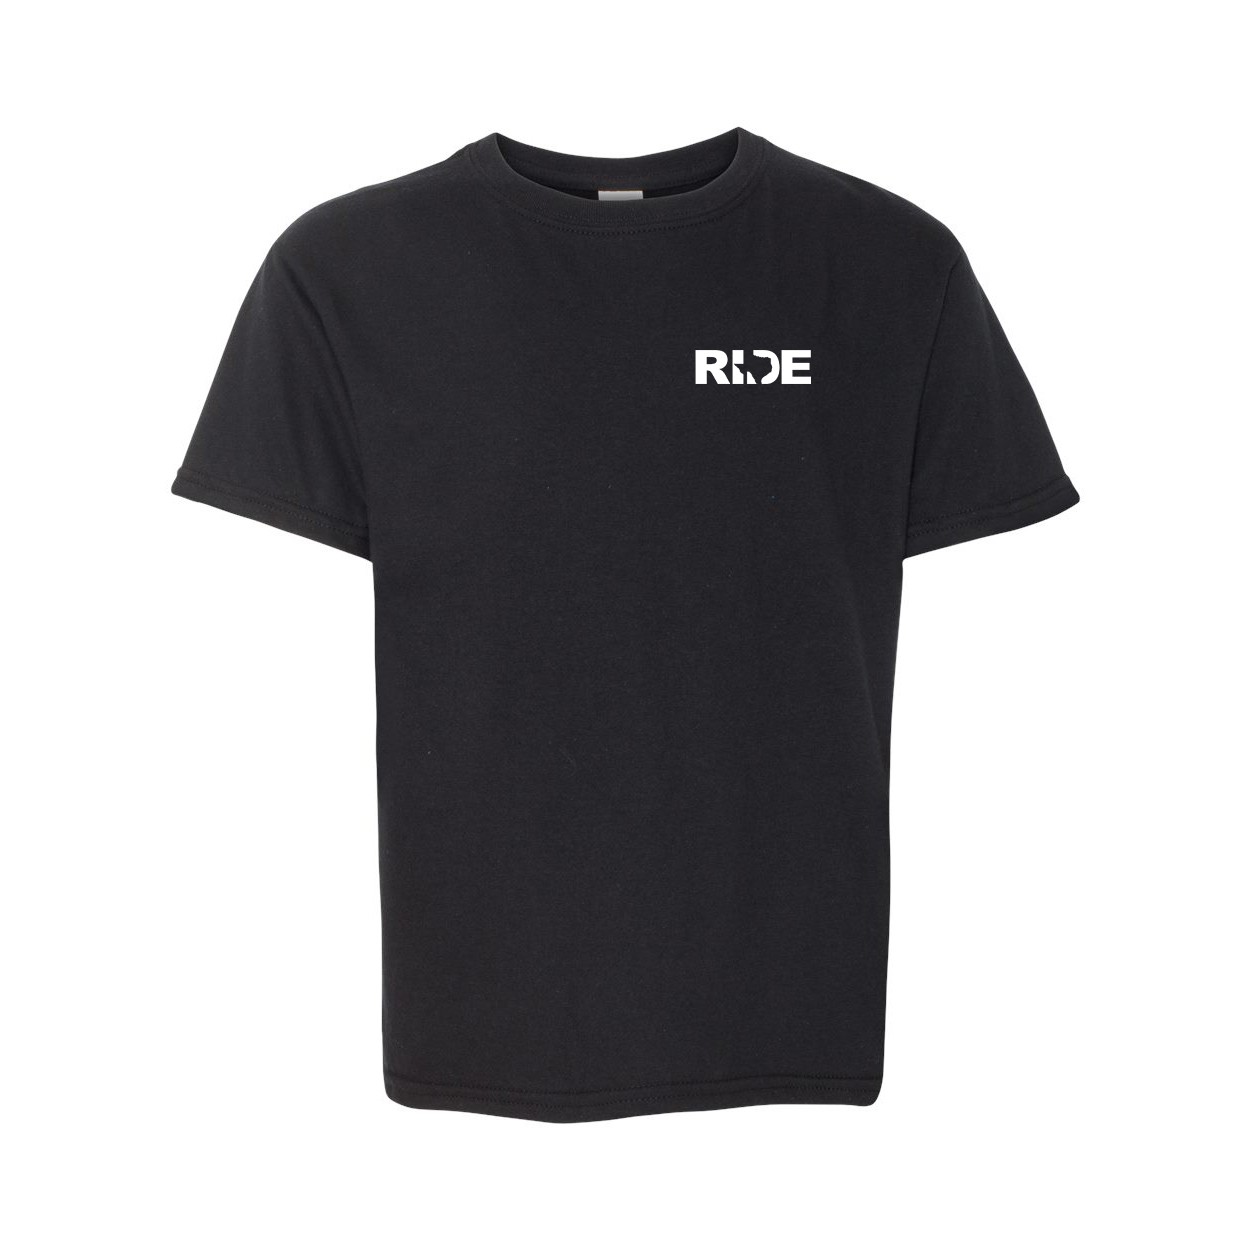 Ride Texas Night Out Youth T-Shirt Black (White Logo)